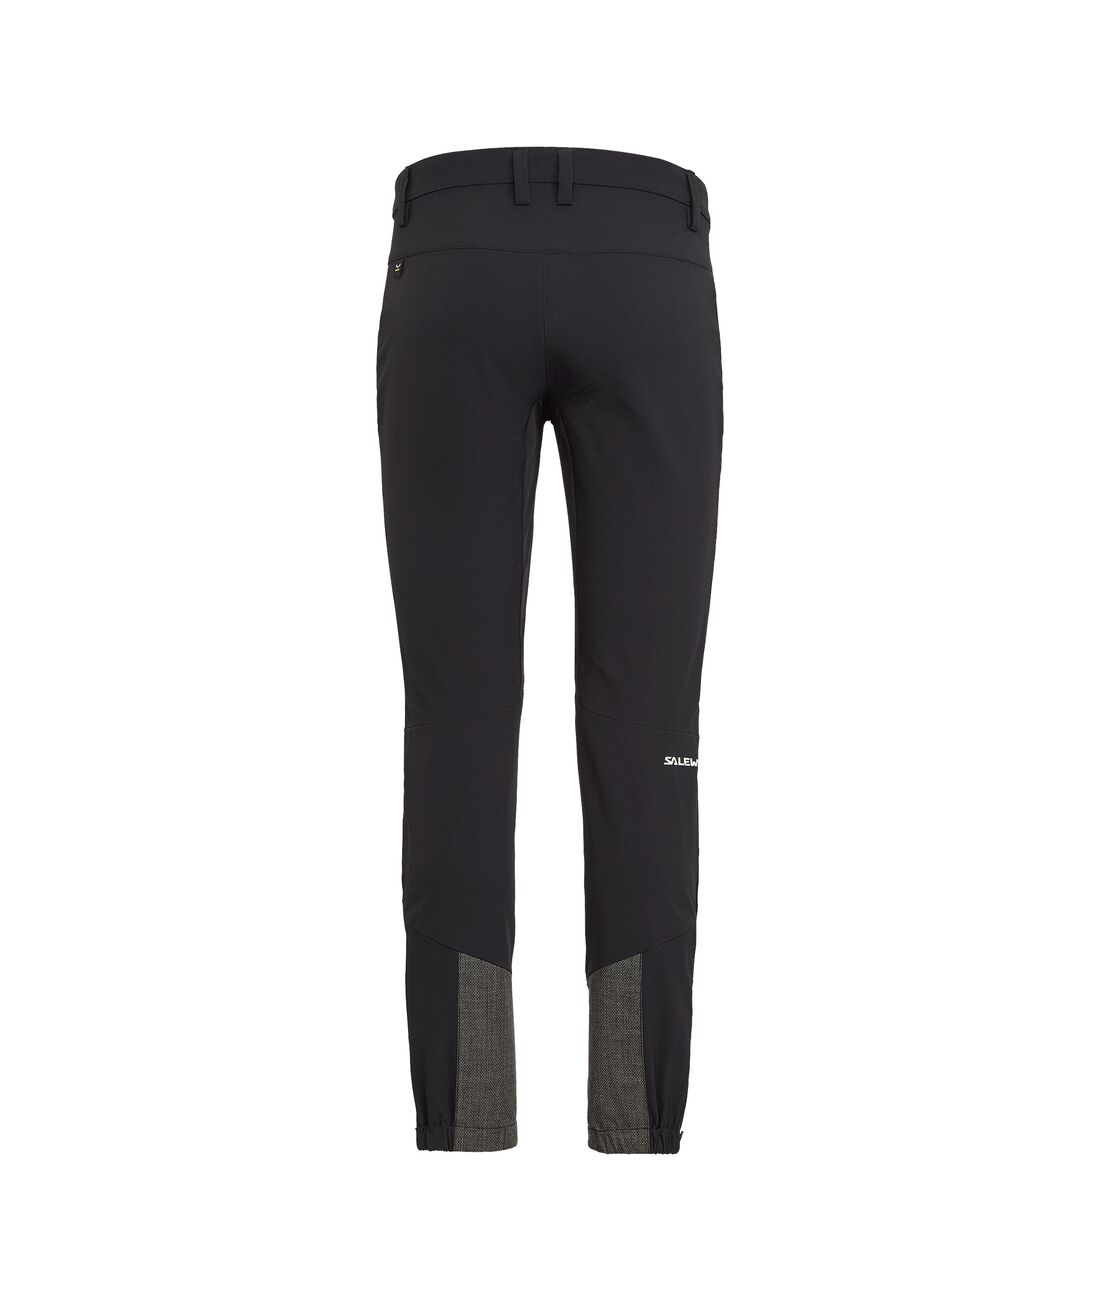 Agner Orval 2 M Pants